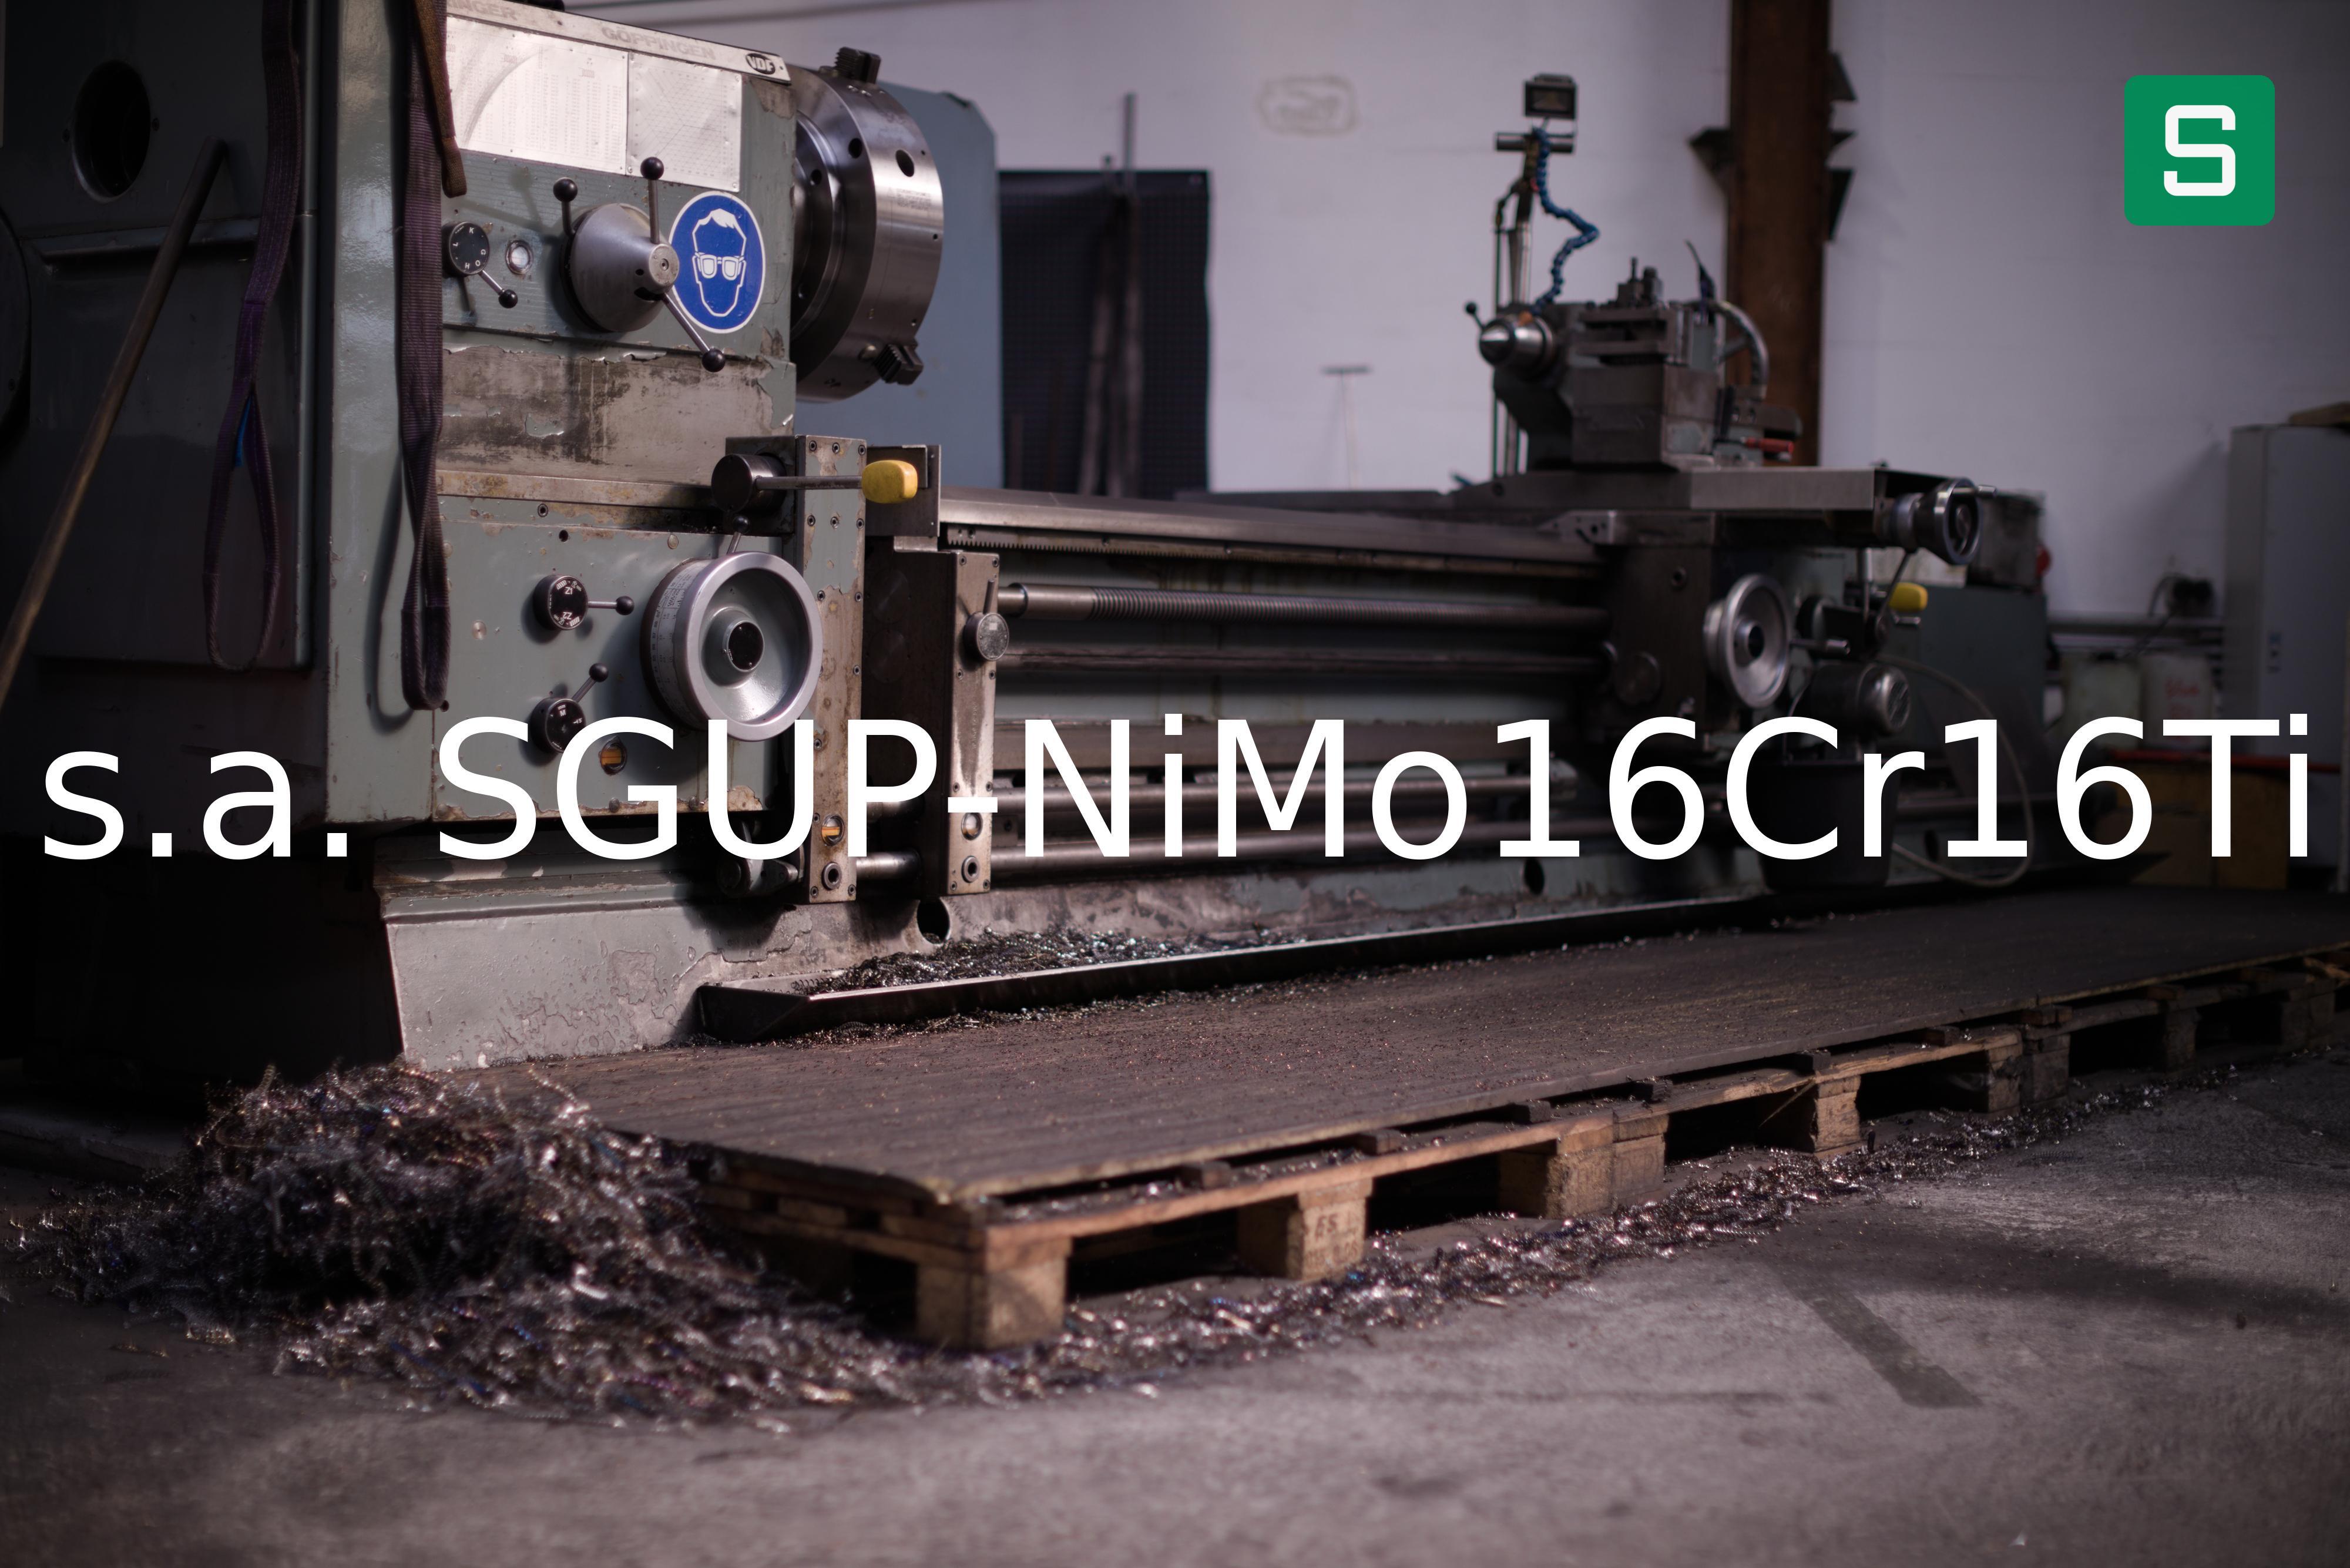 Steel Material: s.a. SGUP-NiMo16Cr16Ti